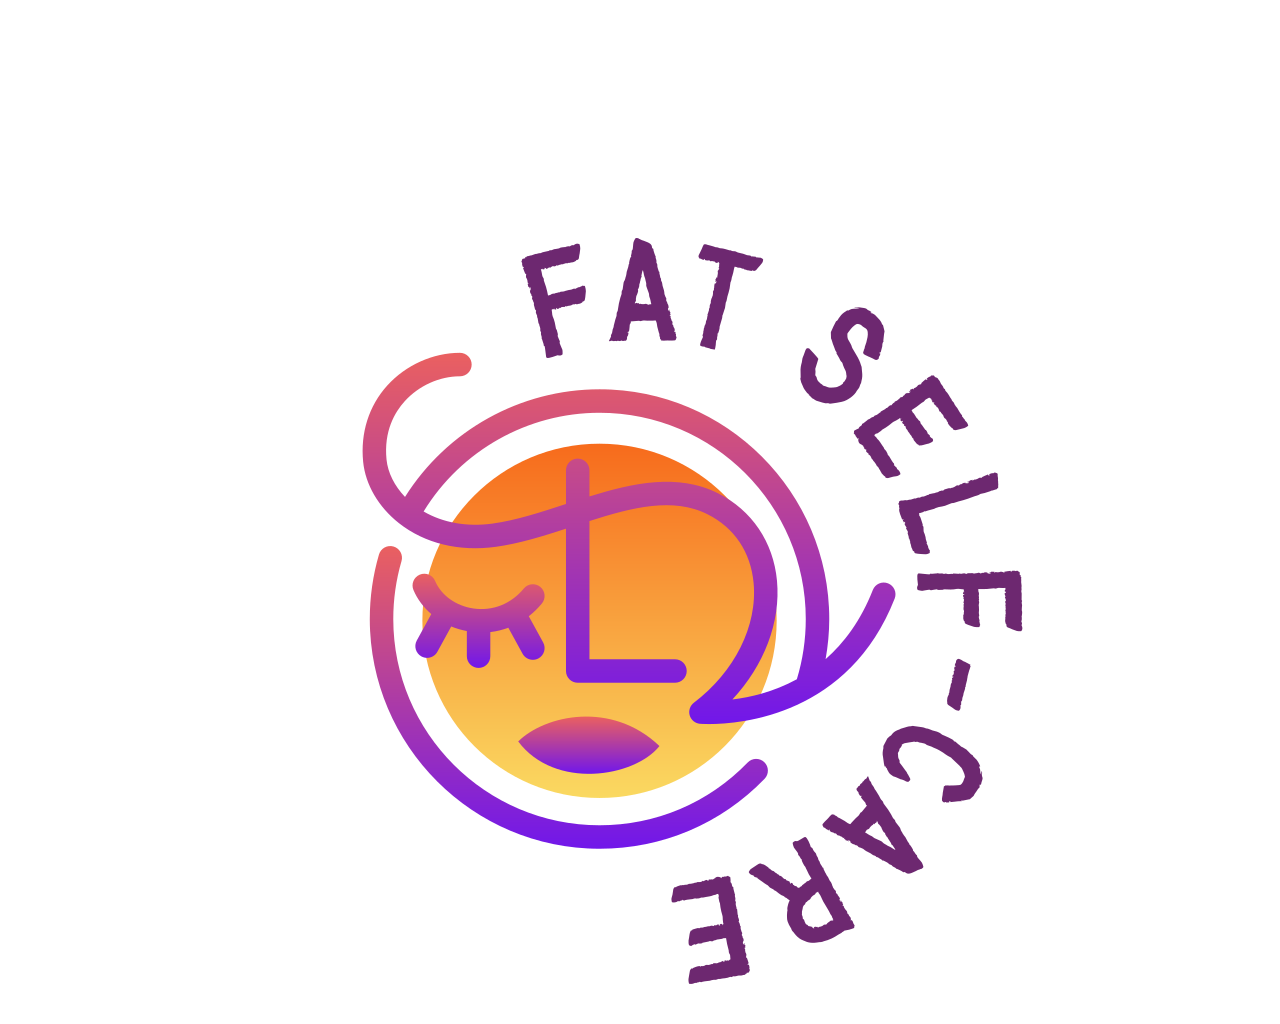 SELF CARE FOR FAT BODIES - COMMUNITY RECOMMENDATIONS AND RESOURCES